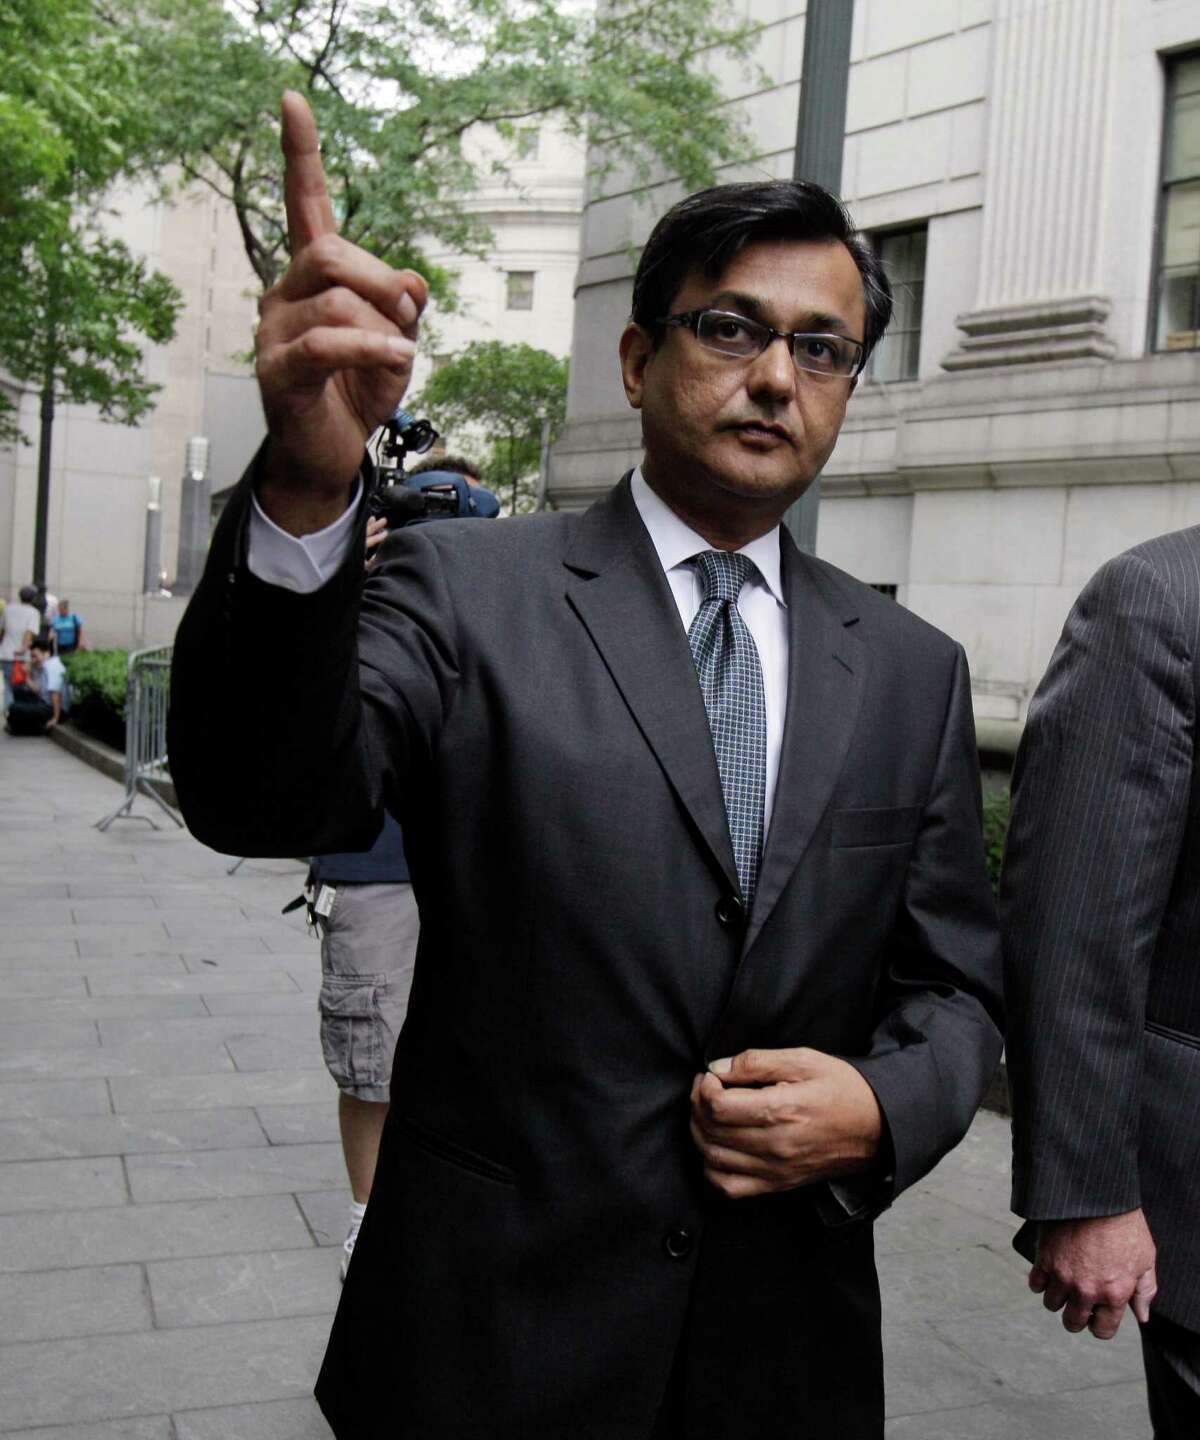 Anil Kumar, a former financial consultant-turned-government witness, leaves Federal Court in New York, Thursday, July 19, 2012. Kumar was sentenced Thursday to two years of probation after prosecutors credited him with helping convict a pair of Wall Street titans on insider trading charges. (AP Photo/Richard Drew)